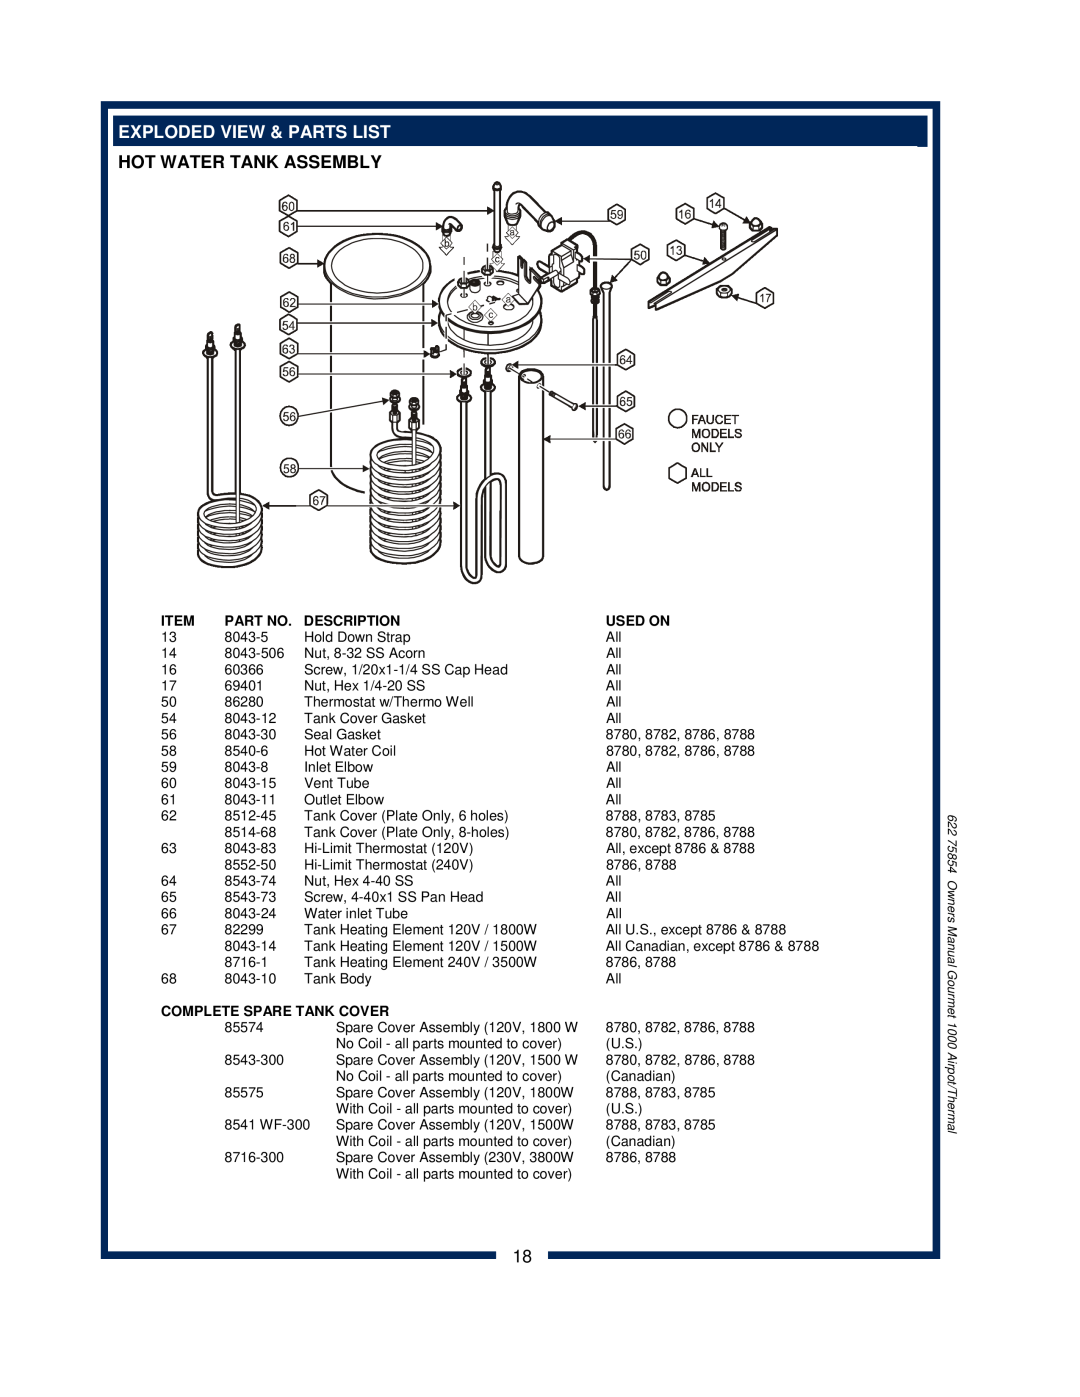 Bloomfield 8782, 8785 Exploded View & Parts List, Hot Water Tank Assembly, Description, Used On, Complete Spare Tank Cover 